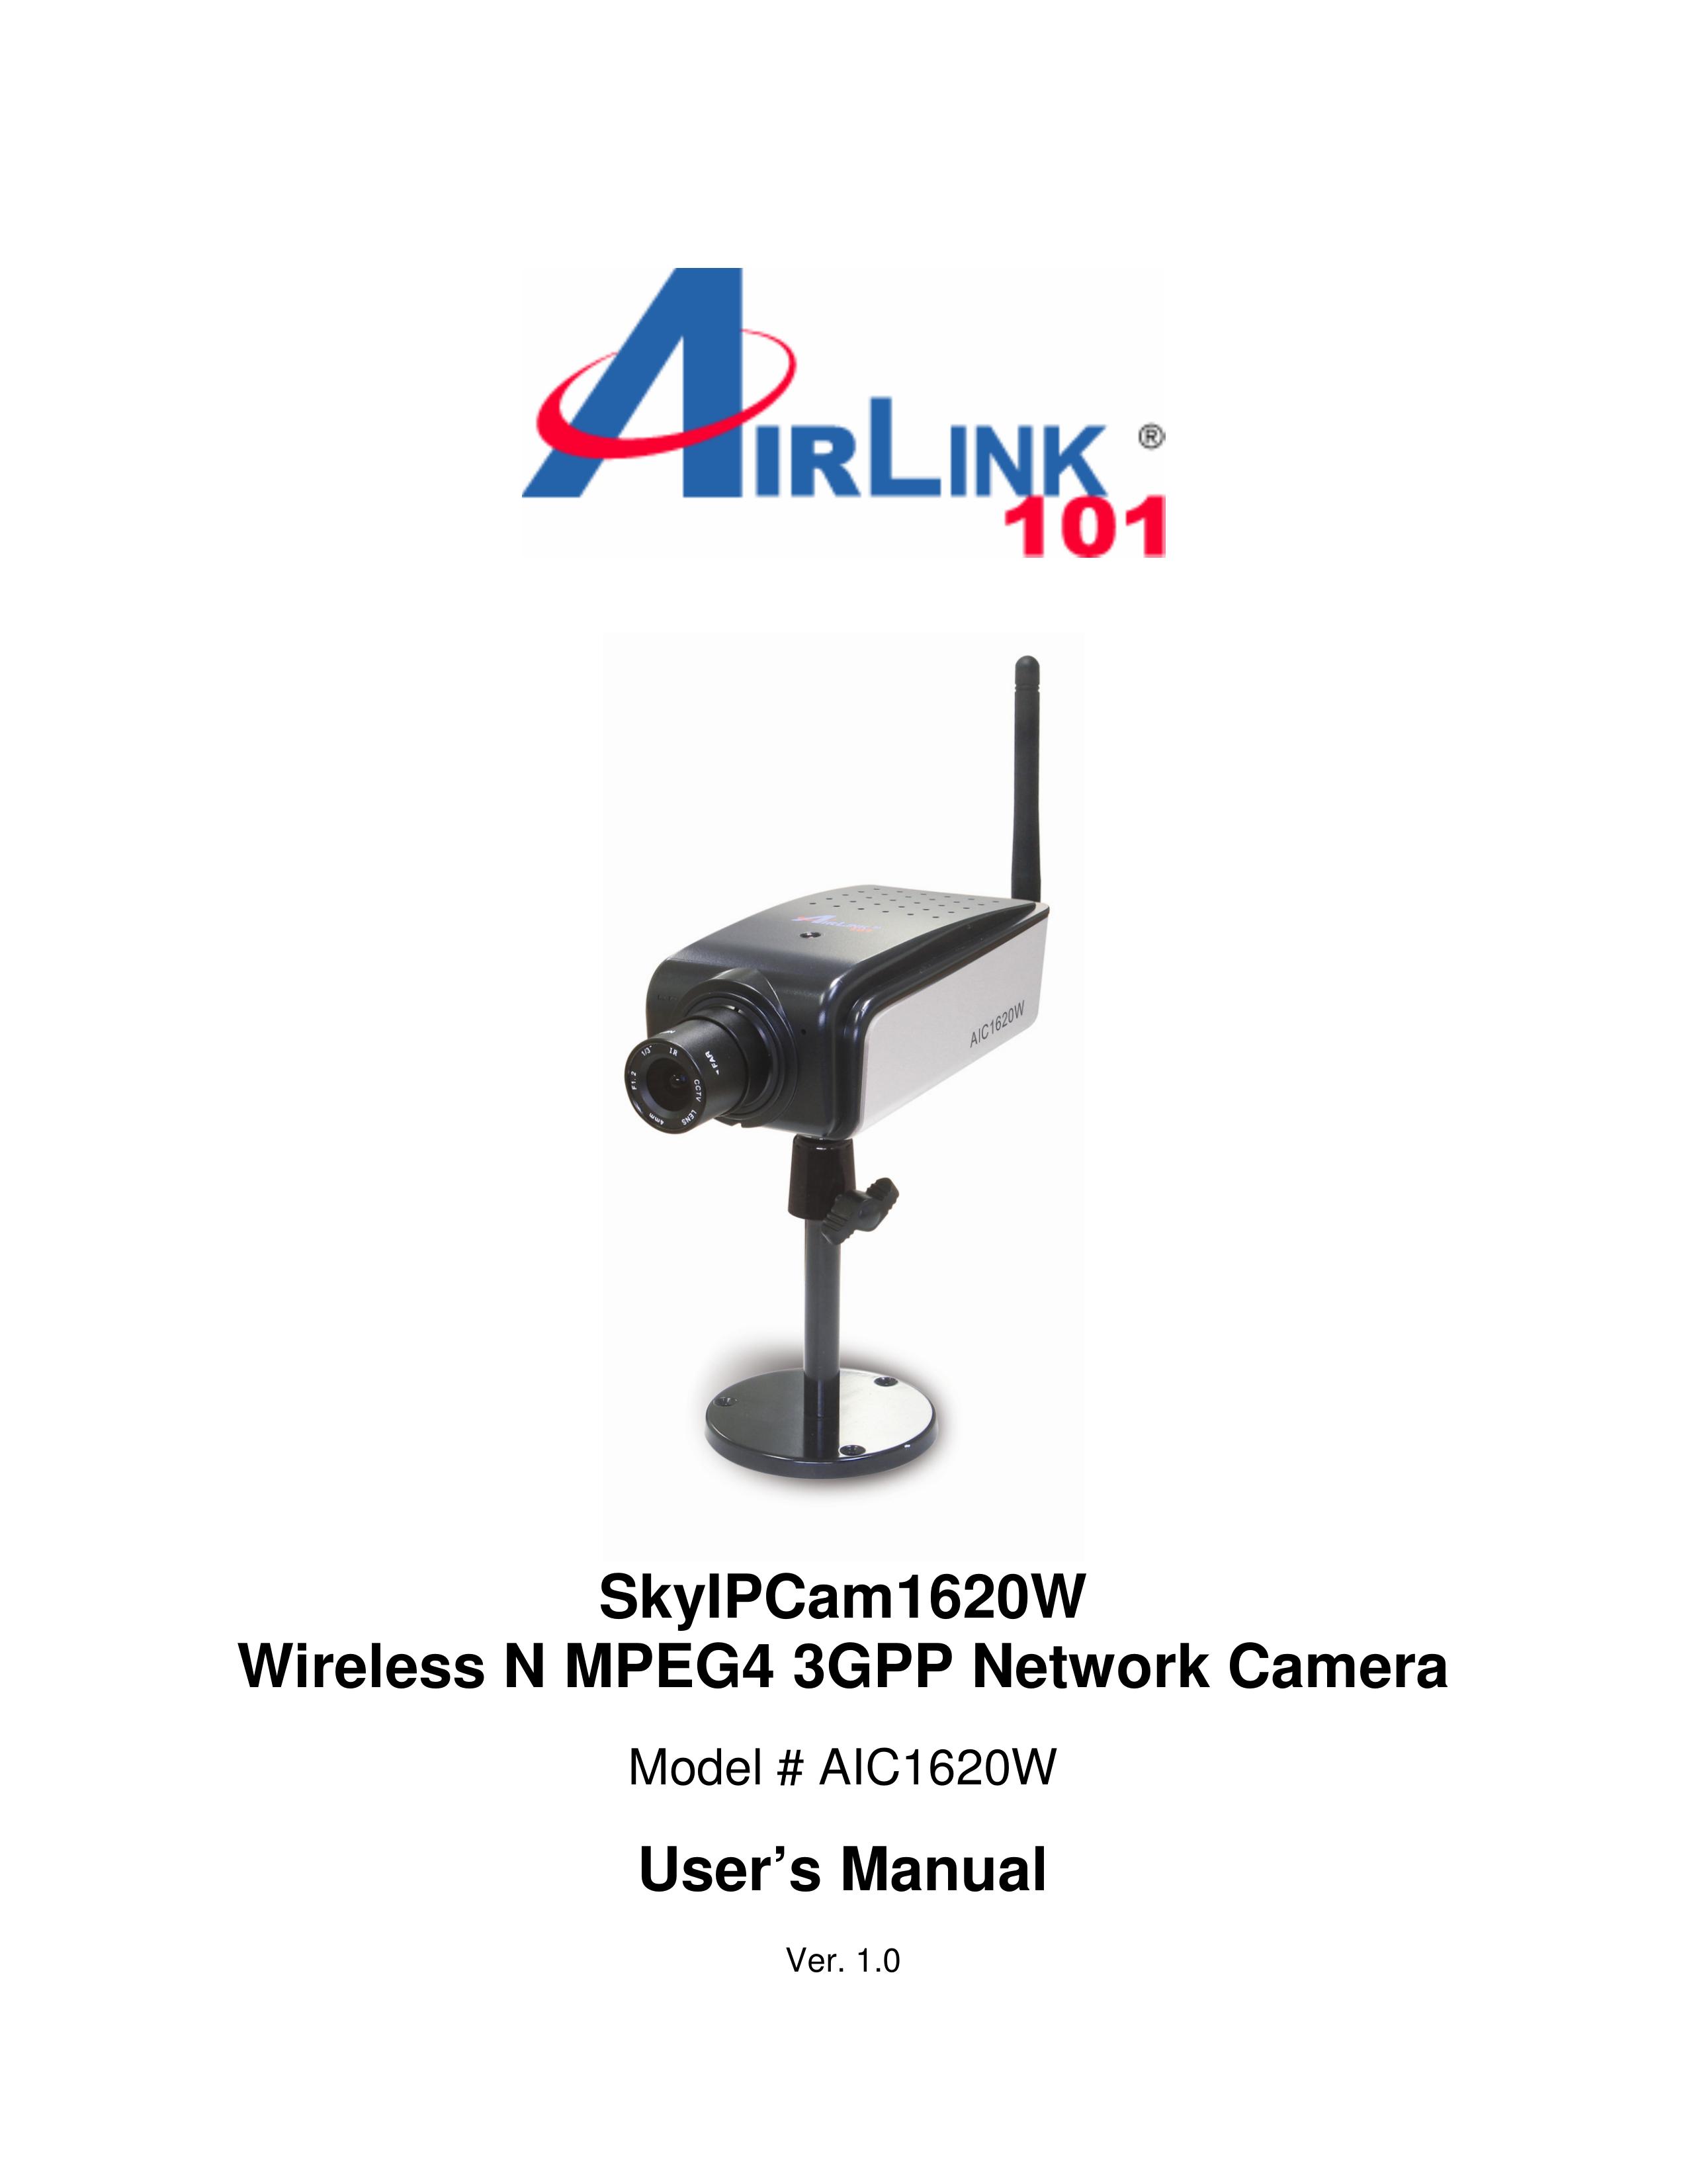 Airlink101 AIC1620W Security Camera User Manual